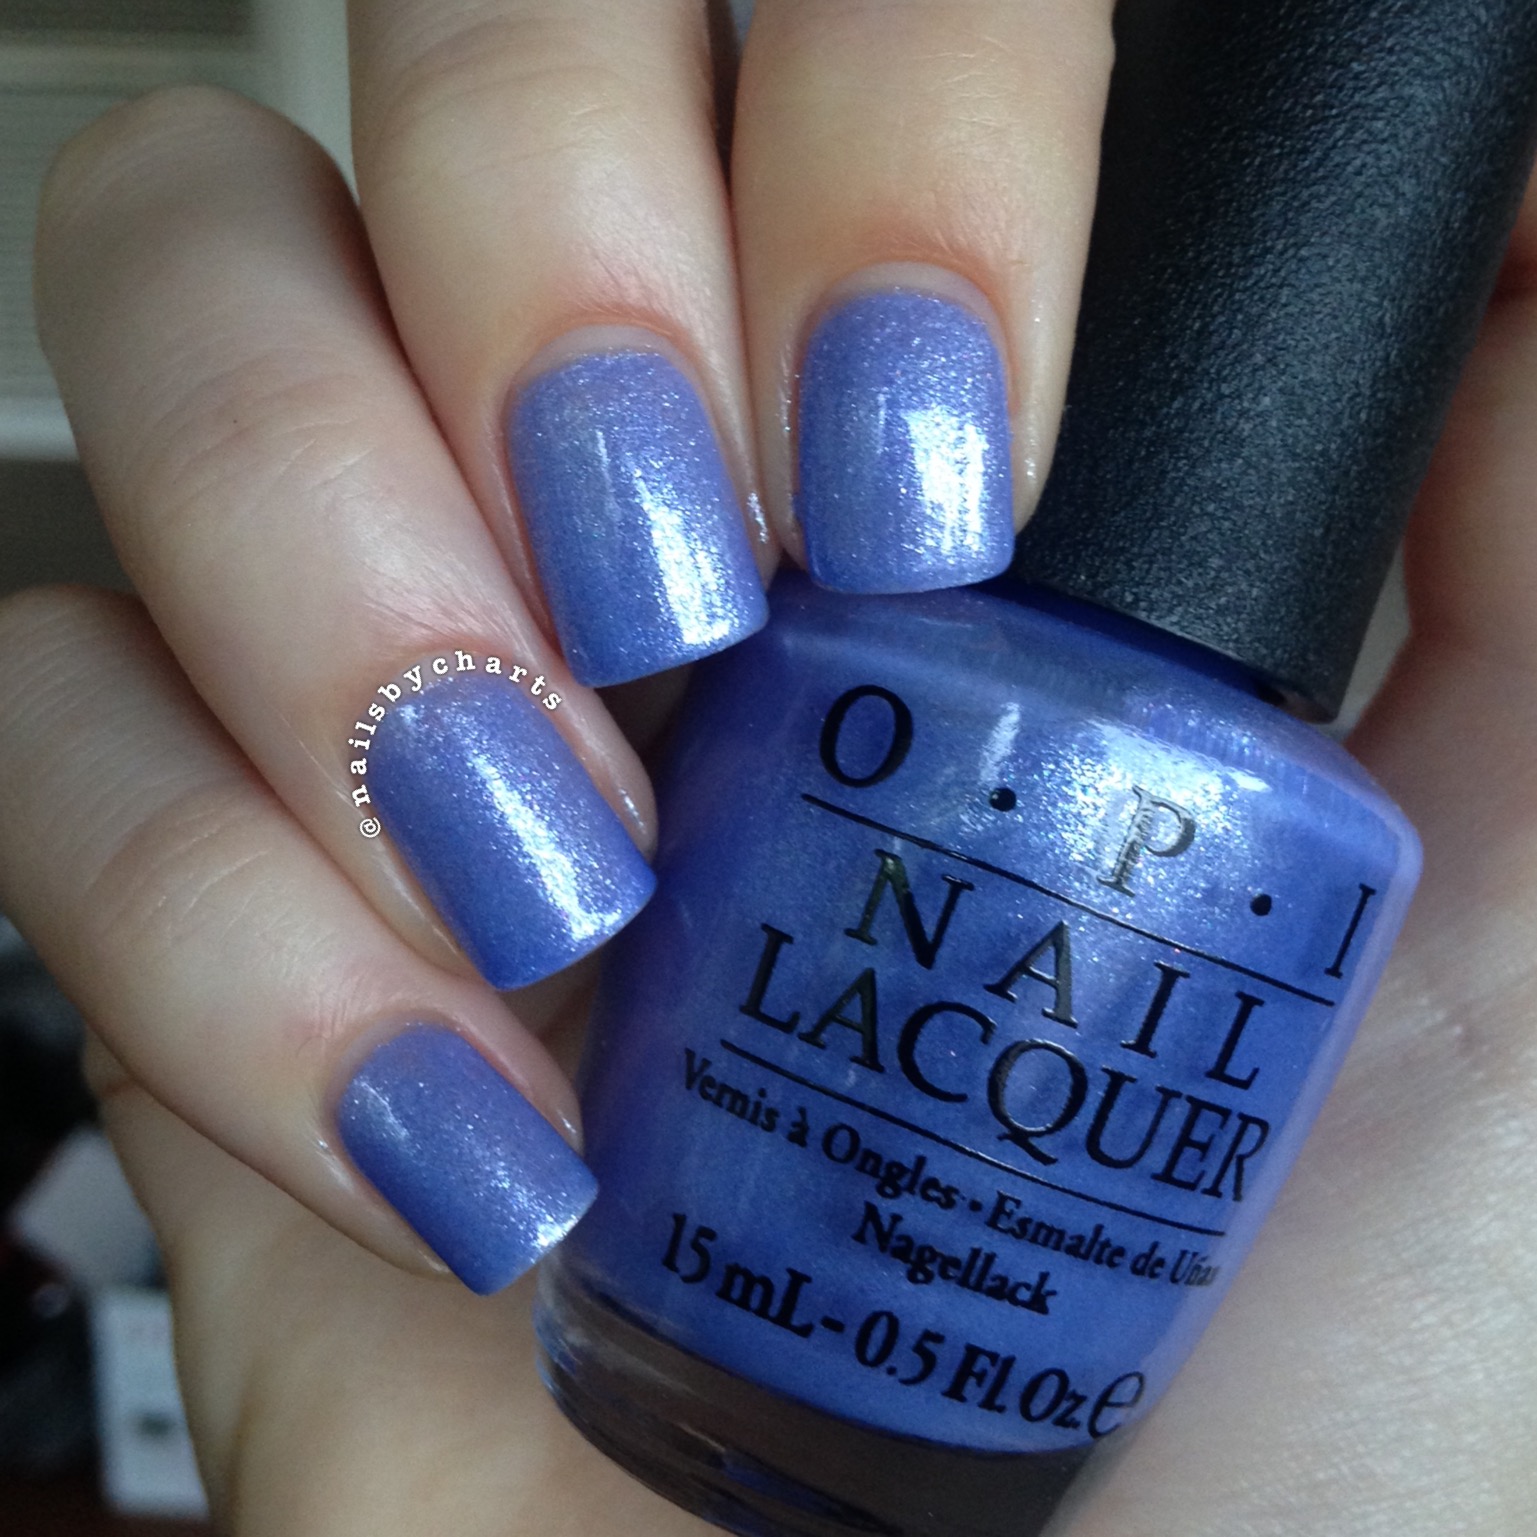 OPI New Orleans Collection - nails by charts